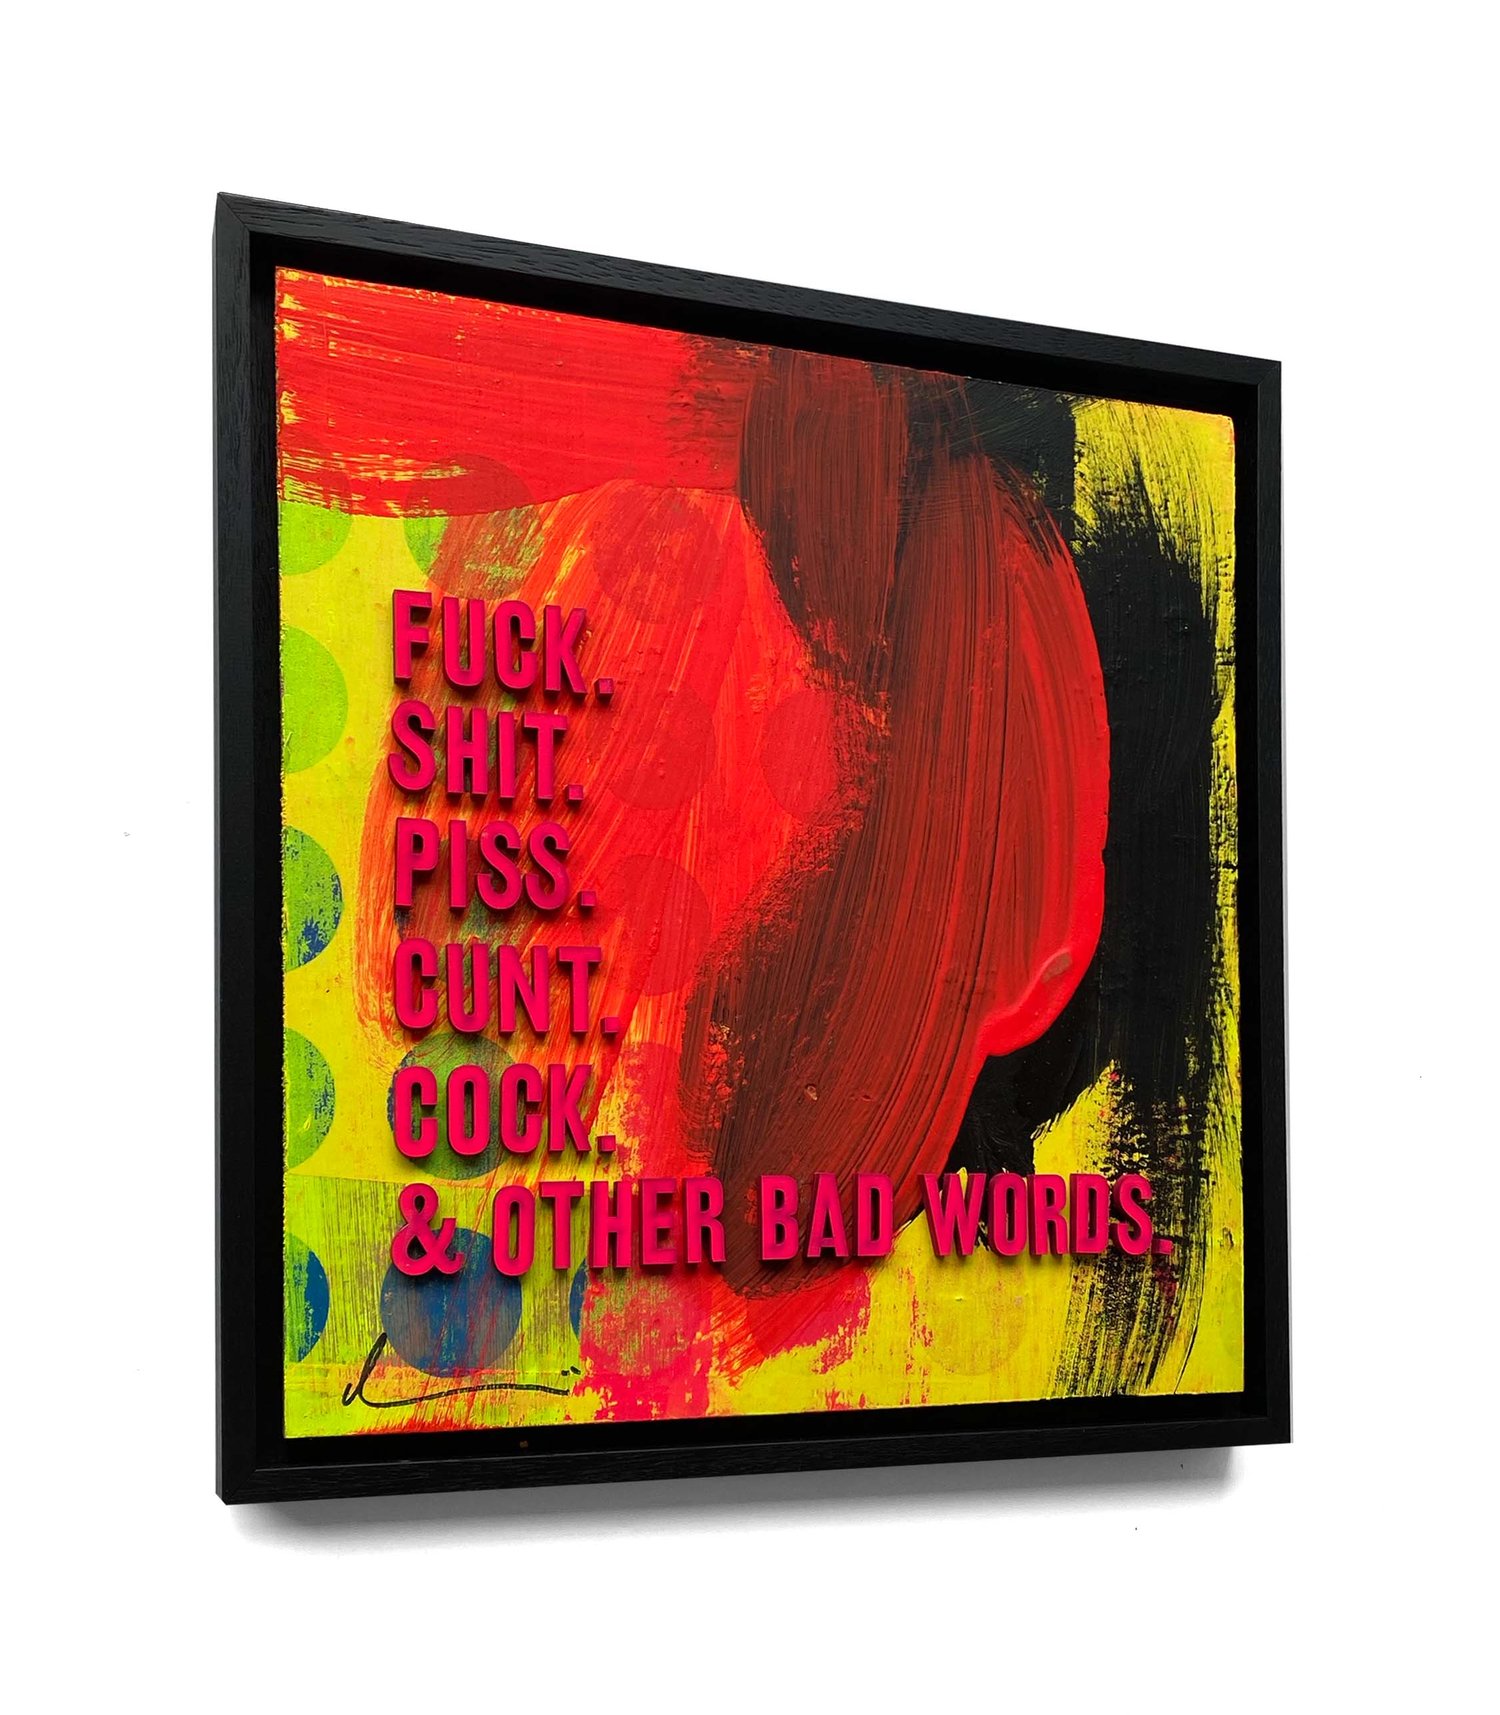 Image of Fuck, shit, piss, cunt, cock and other bad words' by Hackney Dave